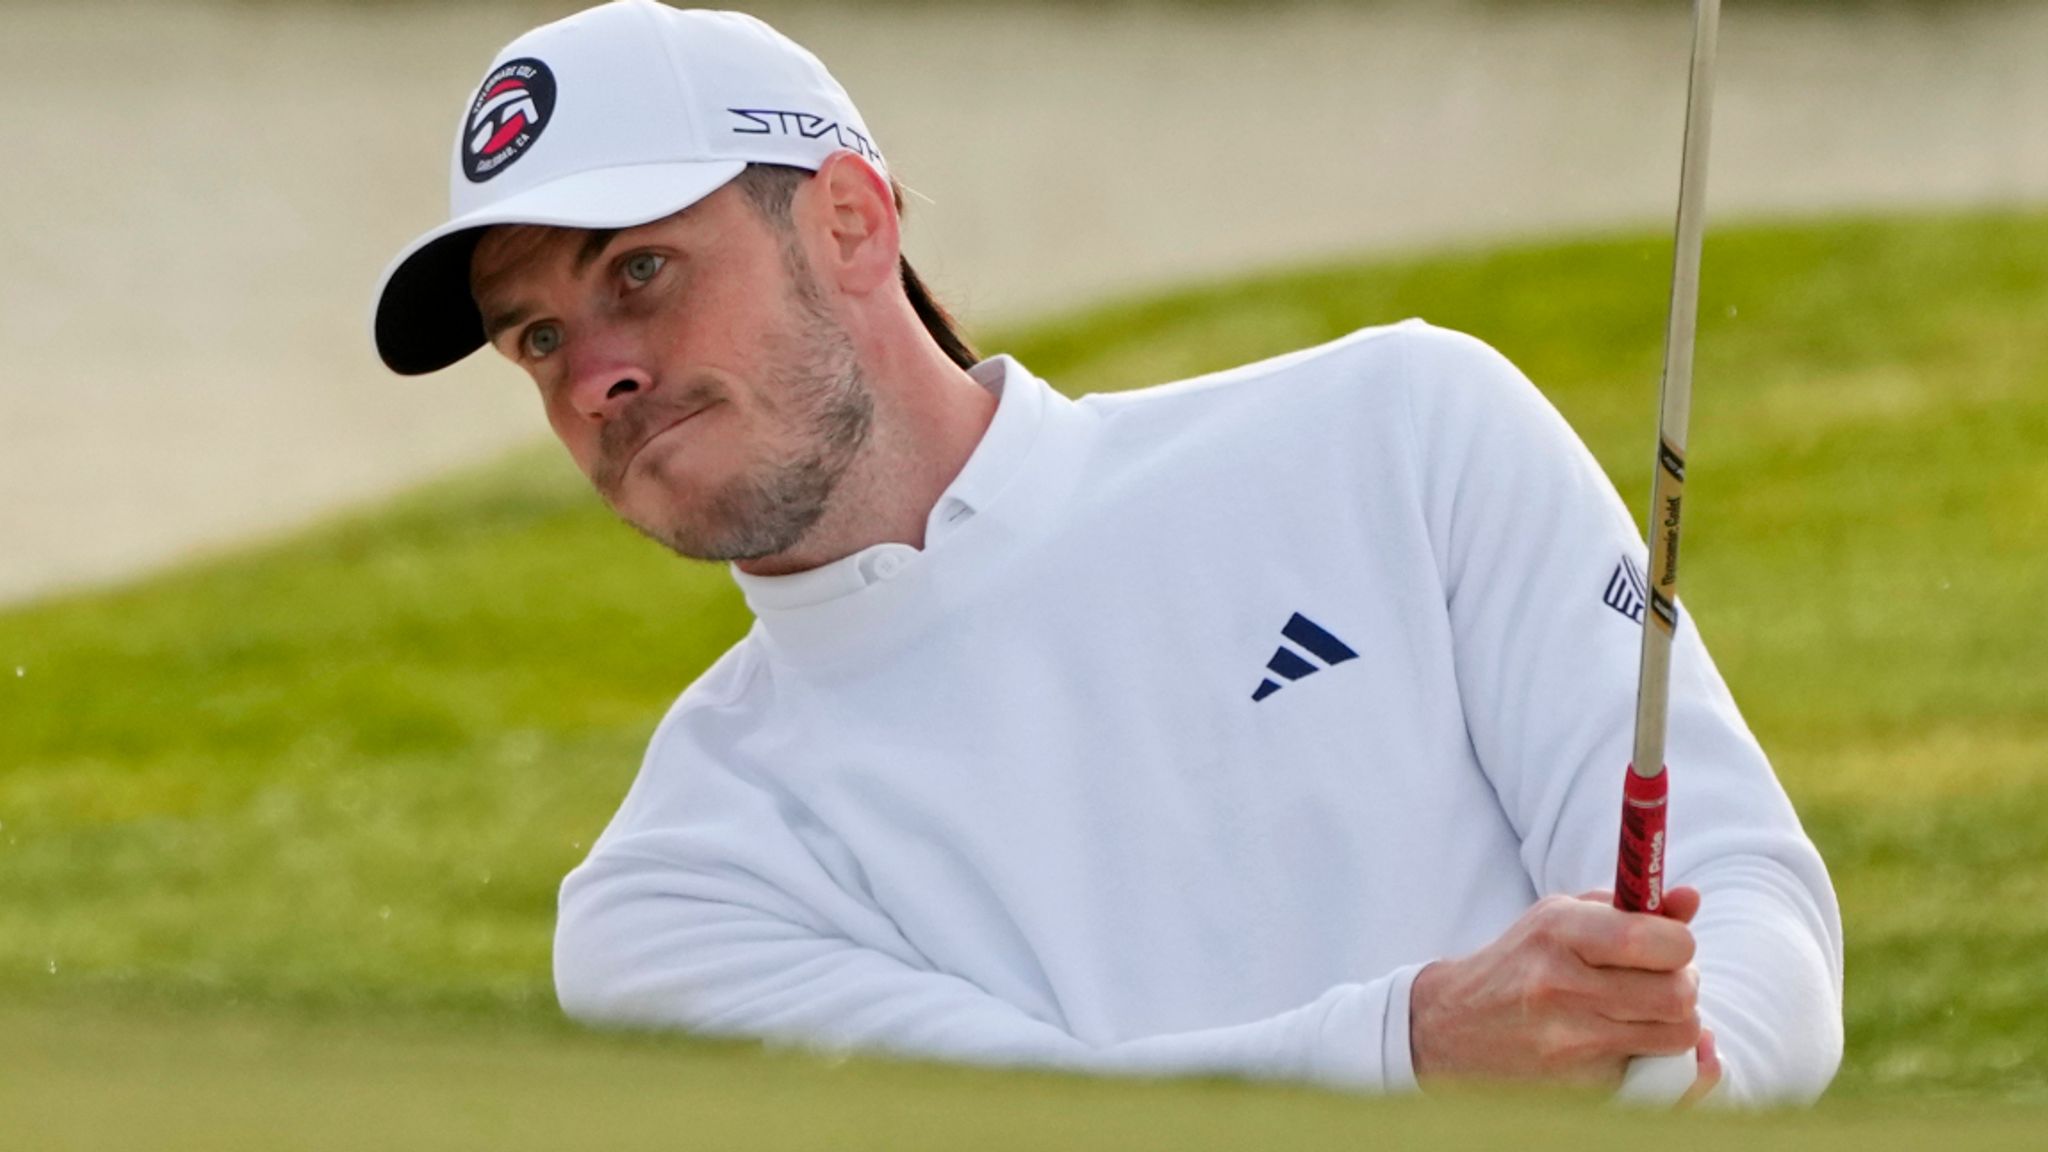 ATandT Pebble Beach Pro-Am Englands Harry Hall second after opening round as Gareth Bale impresses Golf News Sky Sports